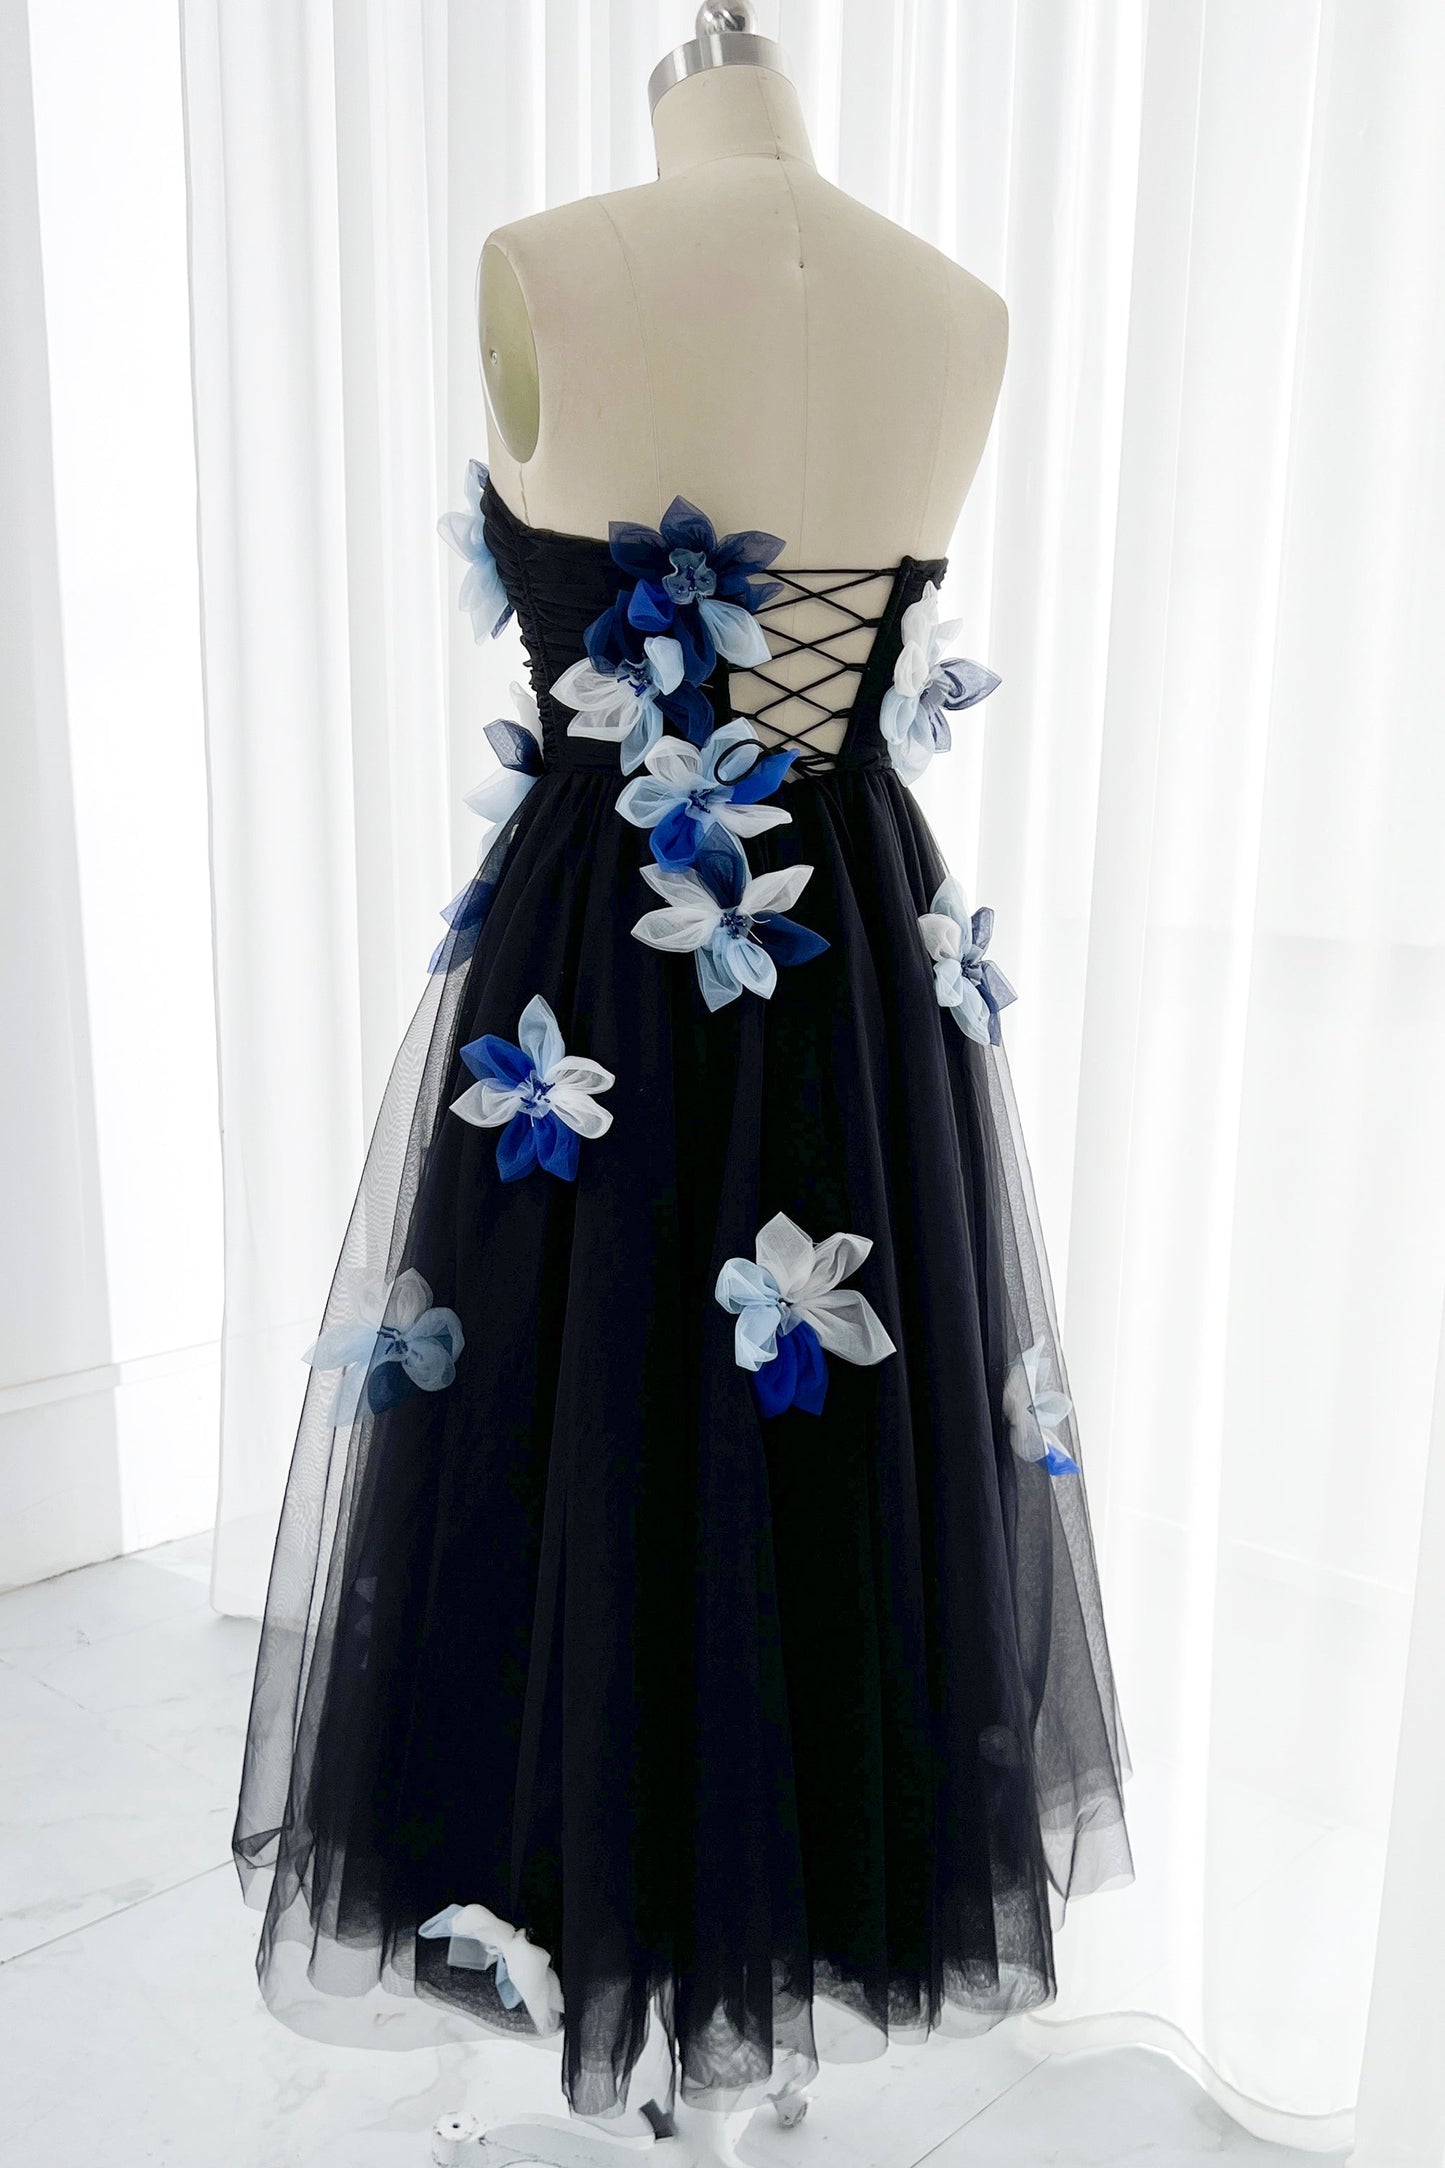 Strapless Black Tulle with Blue and white Flowers Midi Dress